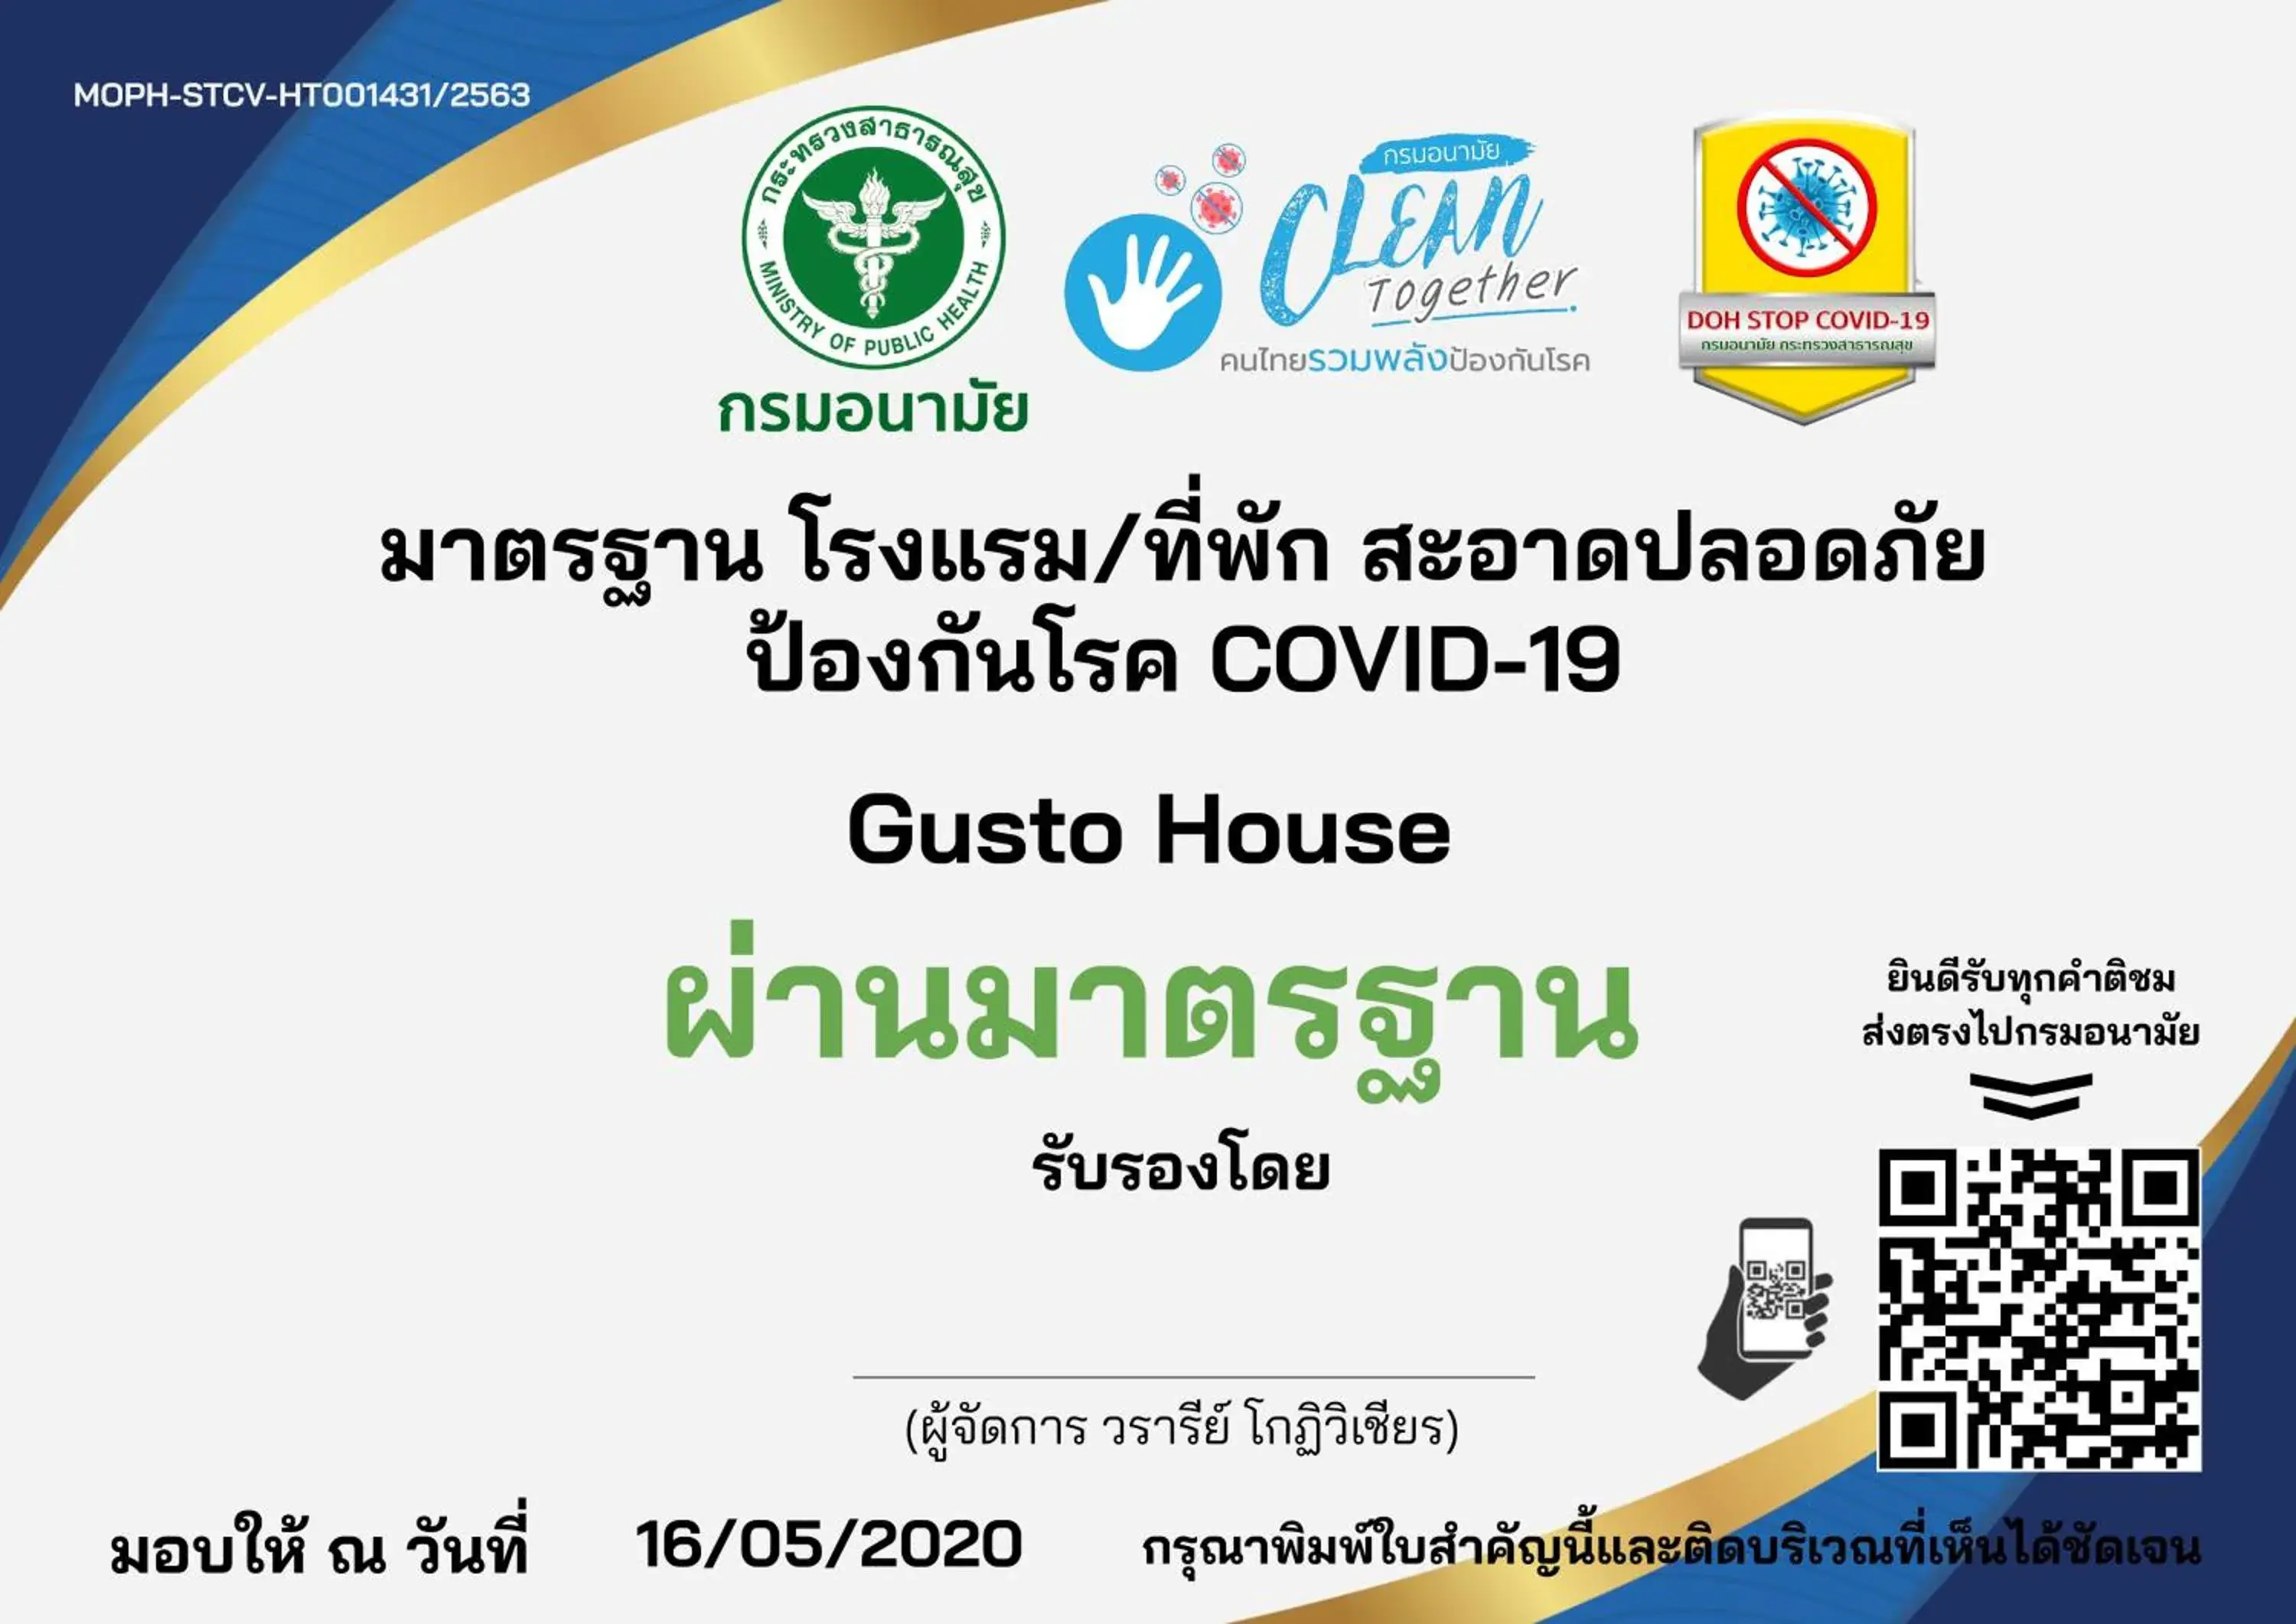 Logo/Certificate/Sign in Gusto House (SHA Extra Plus)